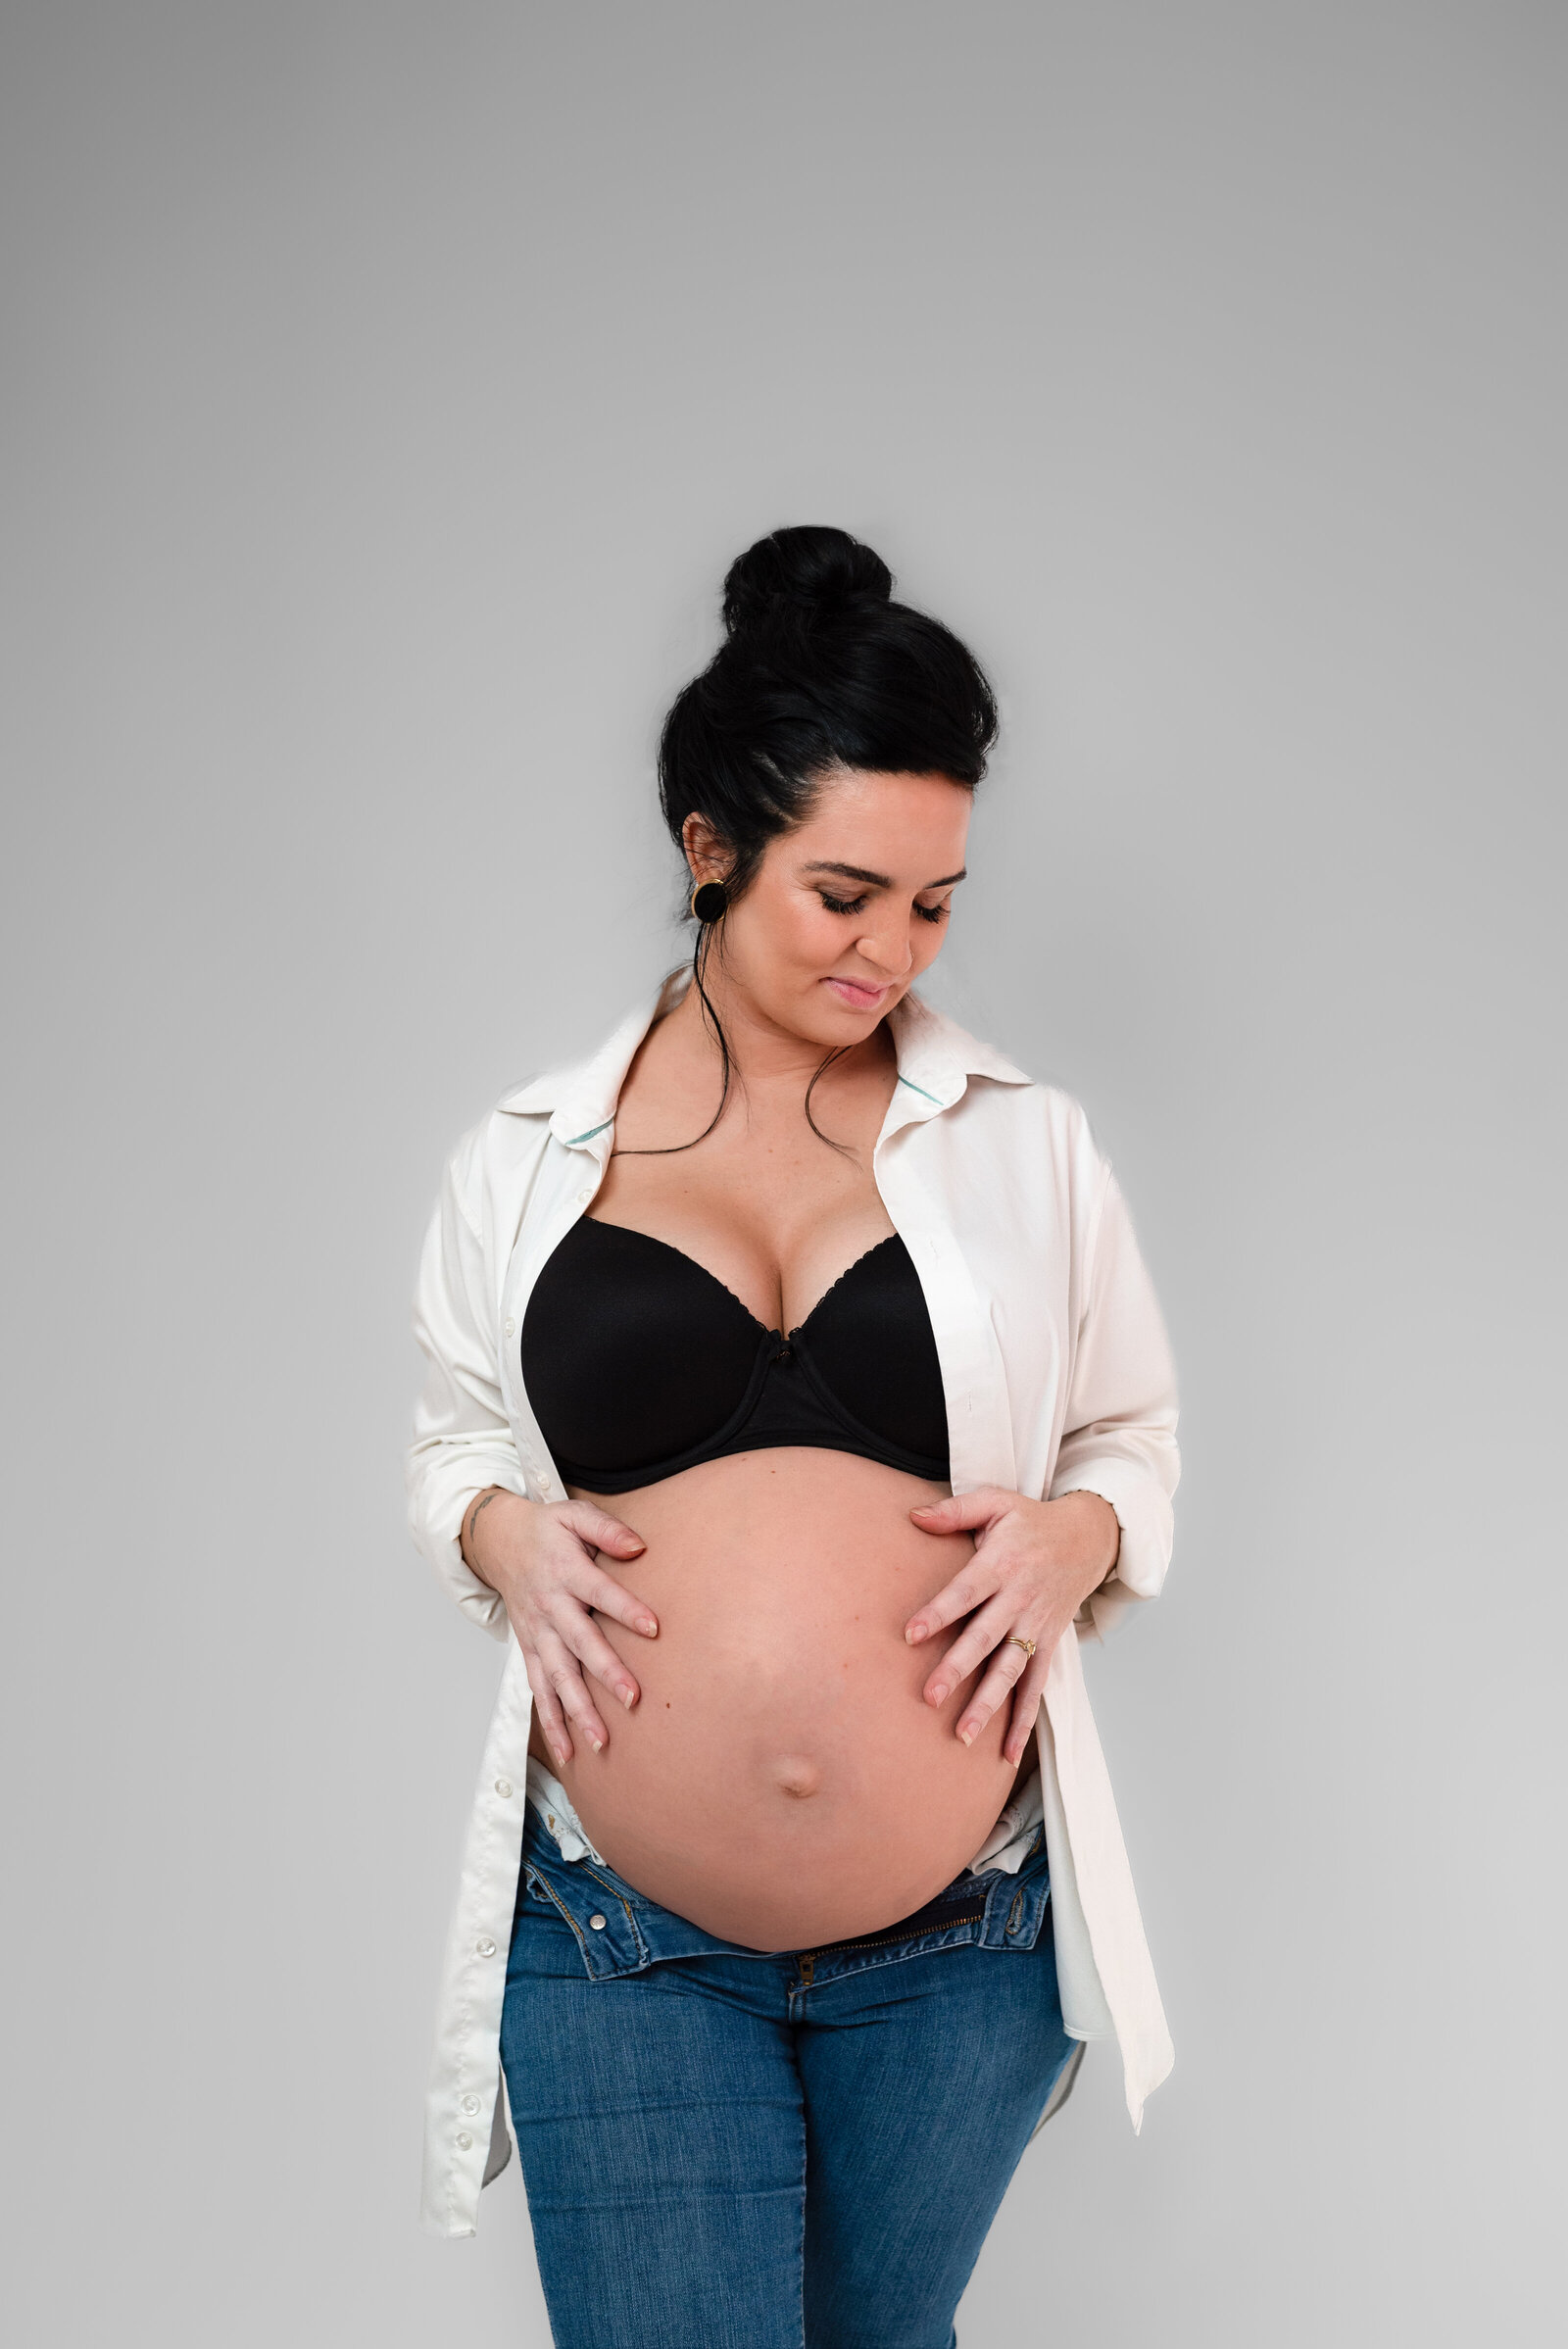 A pregnant woman wearing blue jeans and a white shite posing for her studio maternity photos in Huntsville Alabama